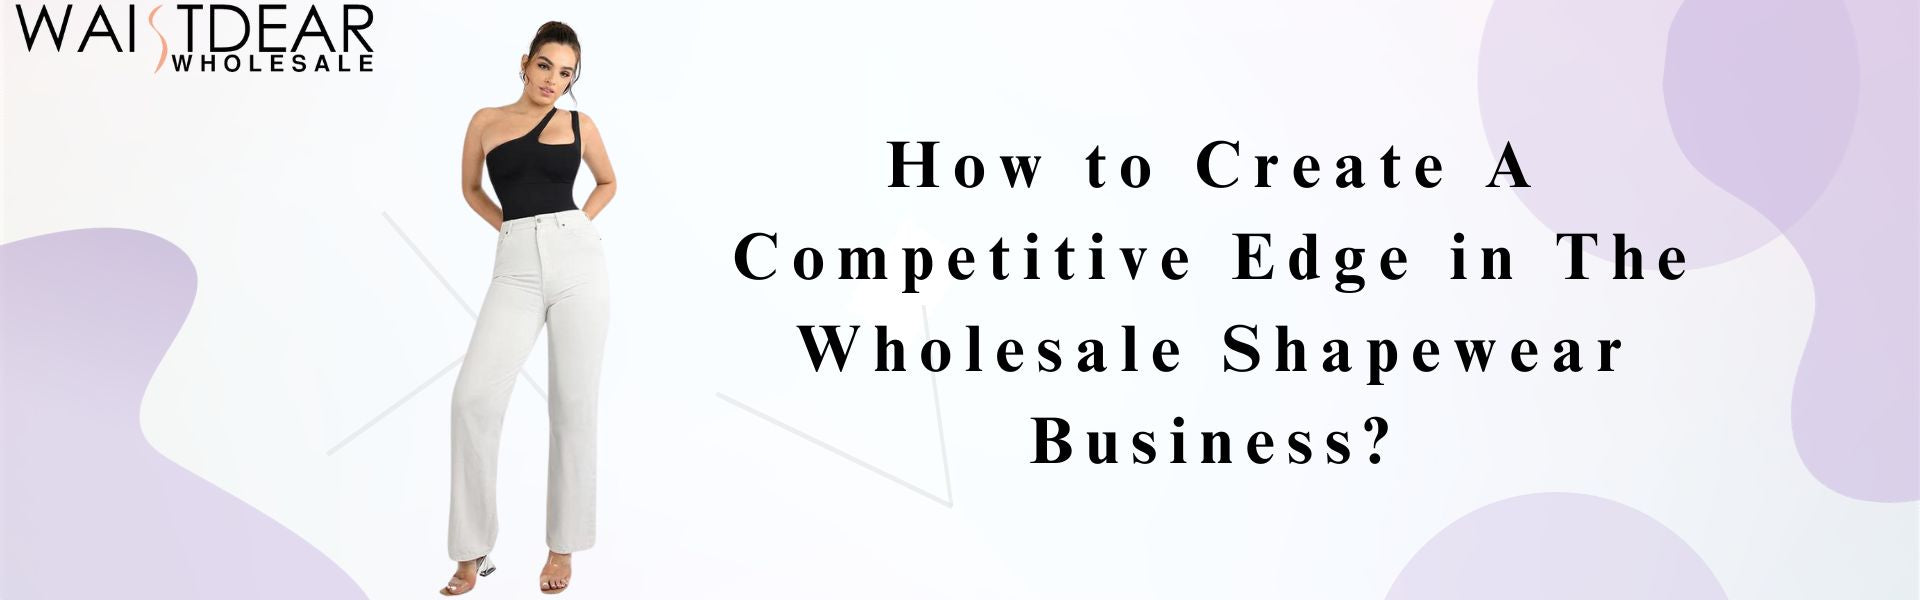 How to Create A Competitive Edge in The Wholesale Shapewear Business?